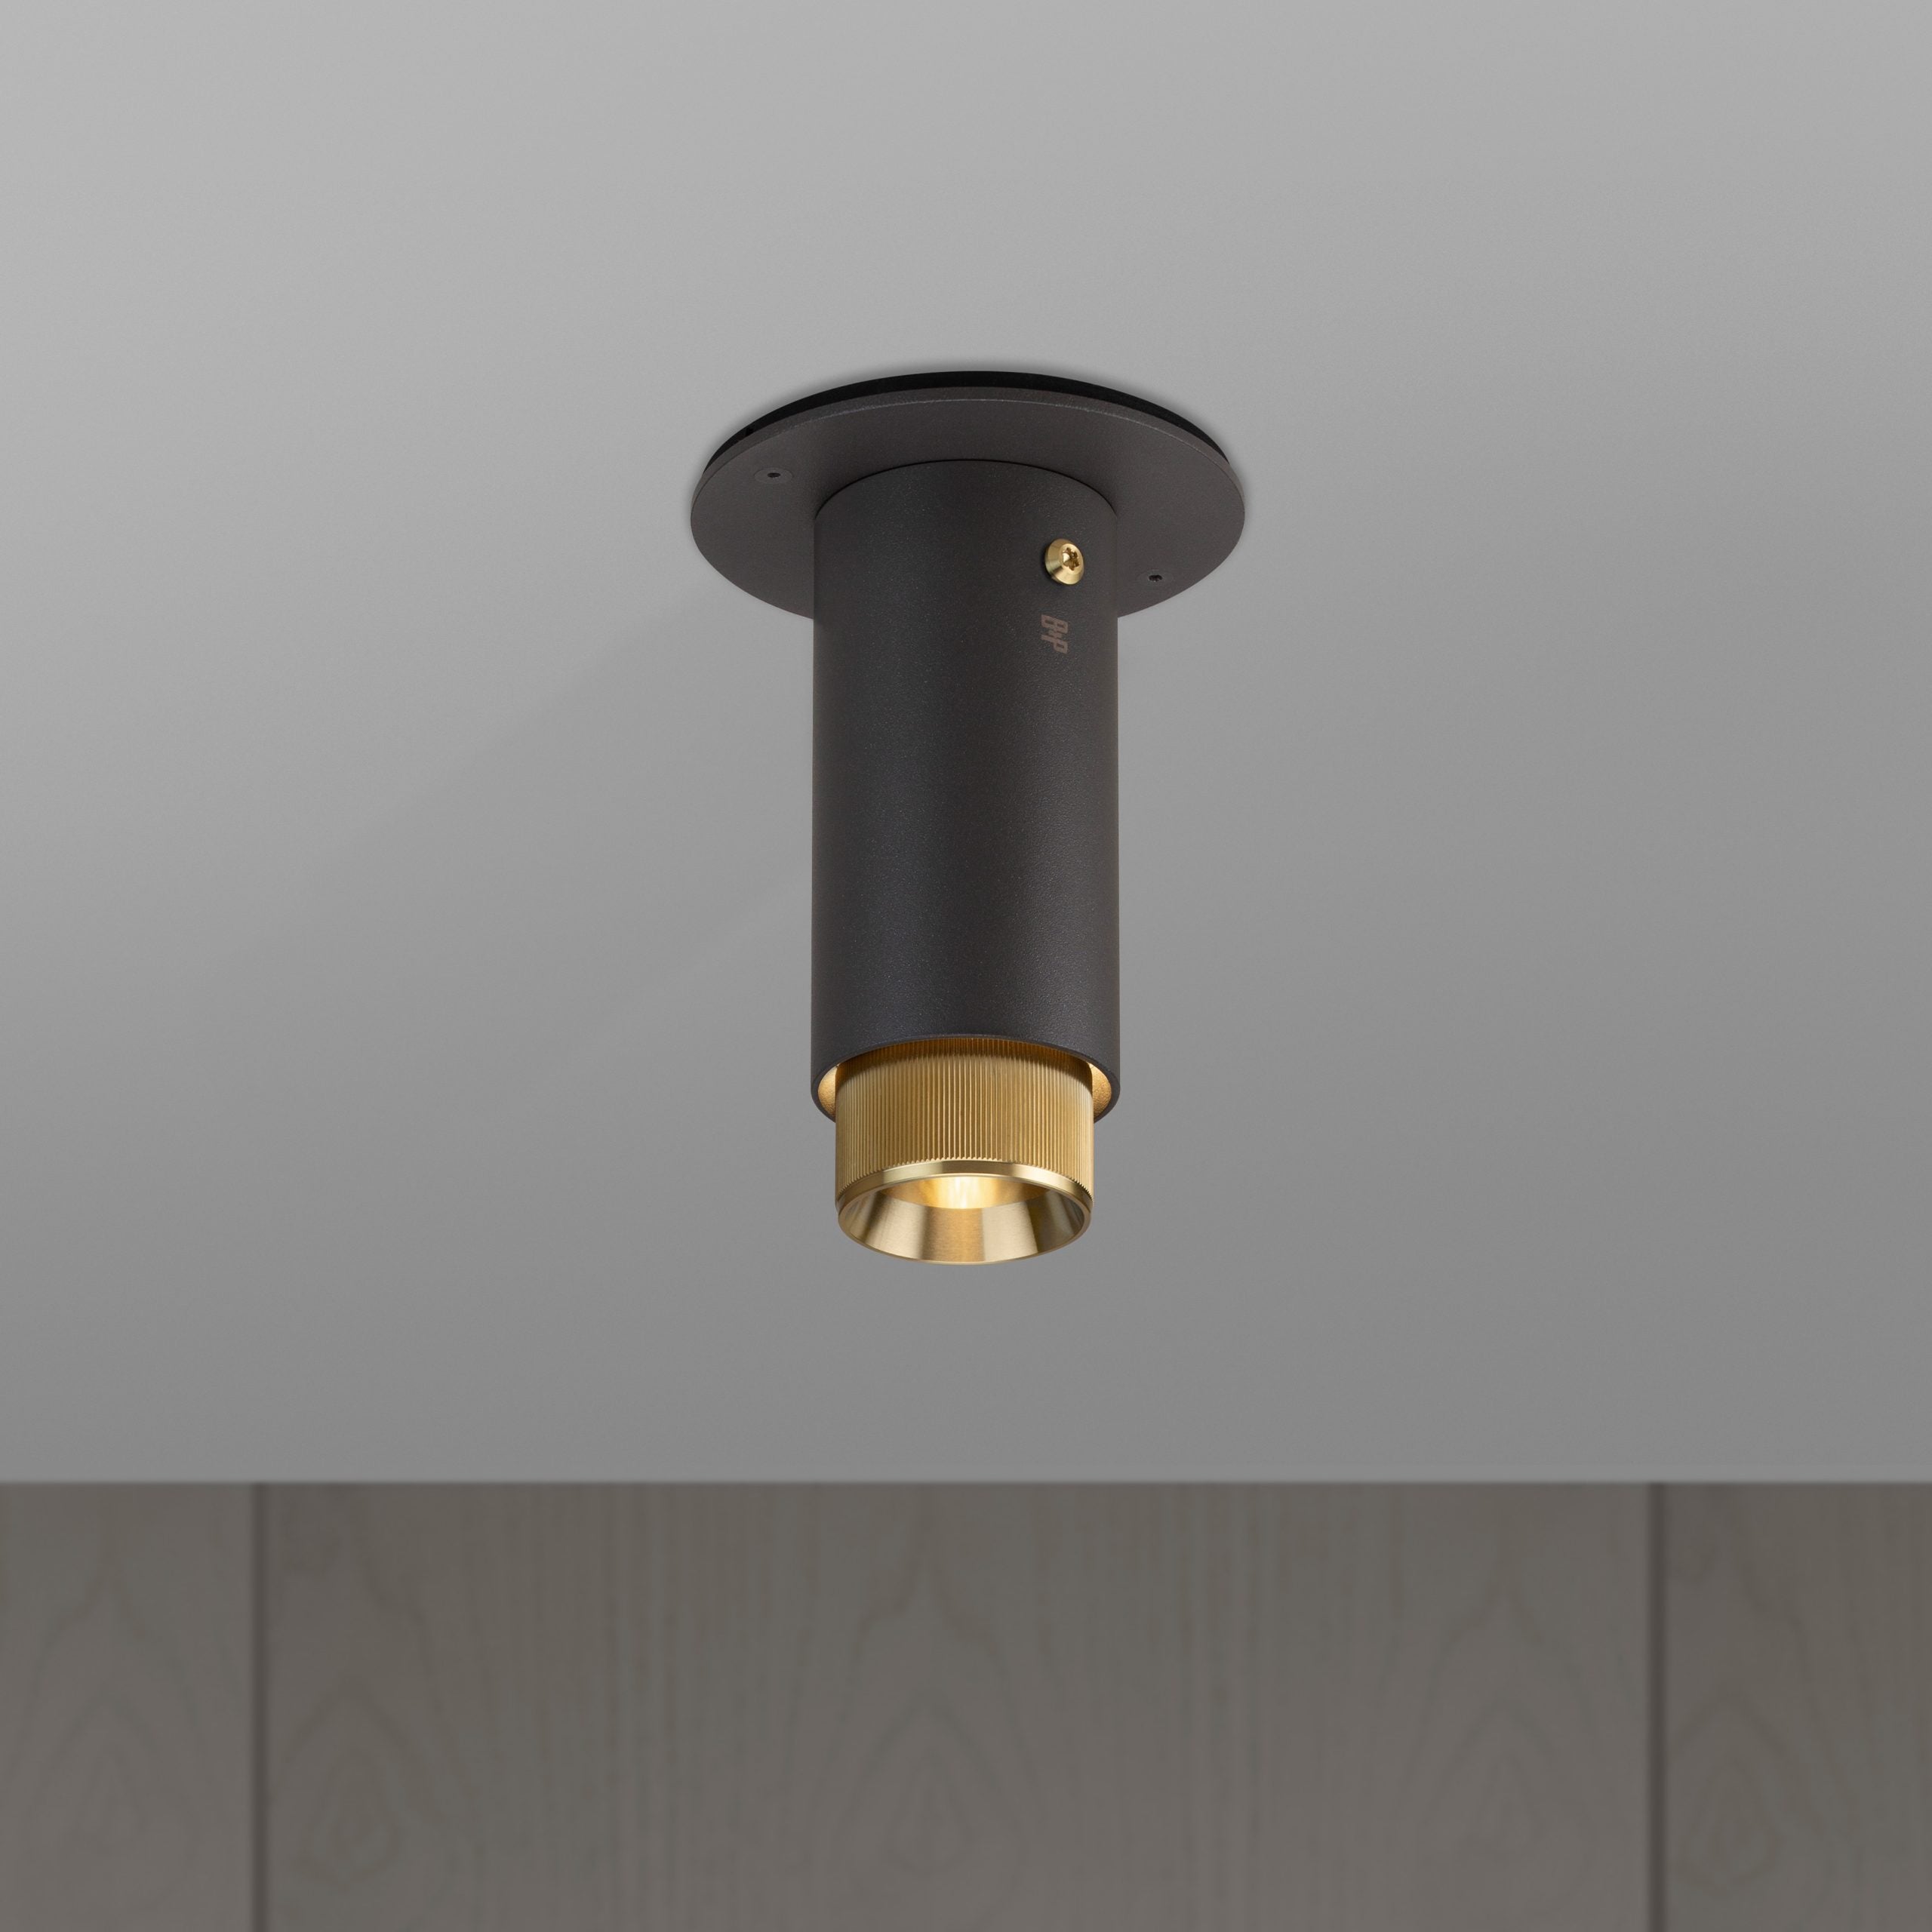 Buster + Punch Exhaust Surface Flush Mount Ceiling Light Buster + Punch Graphite & Brass  